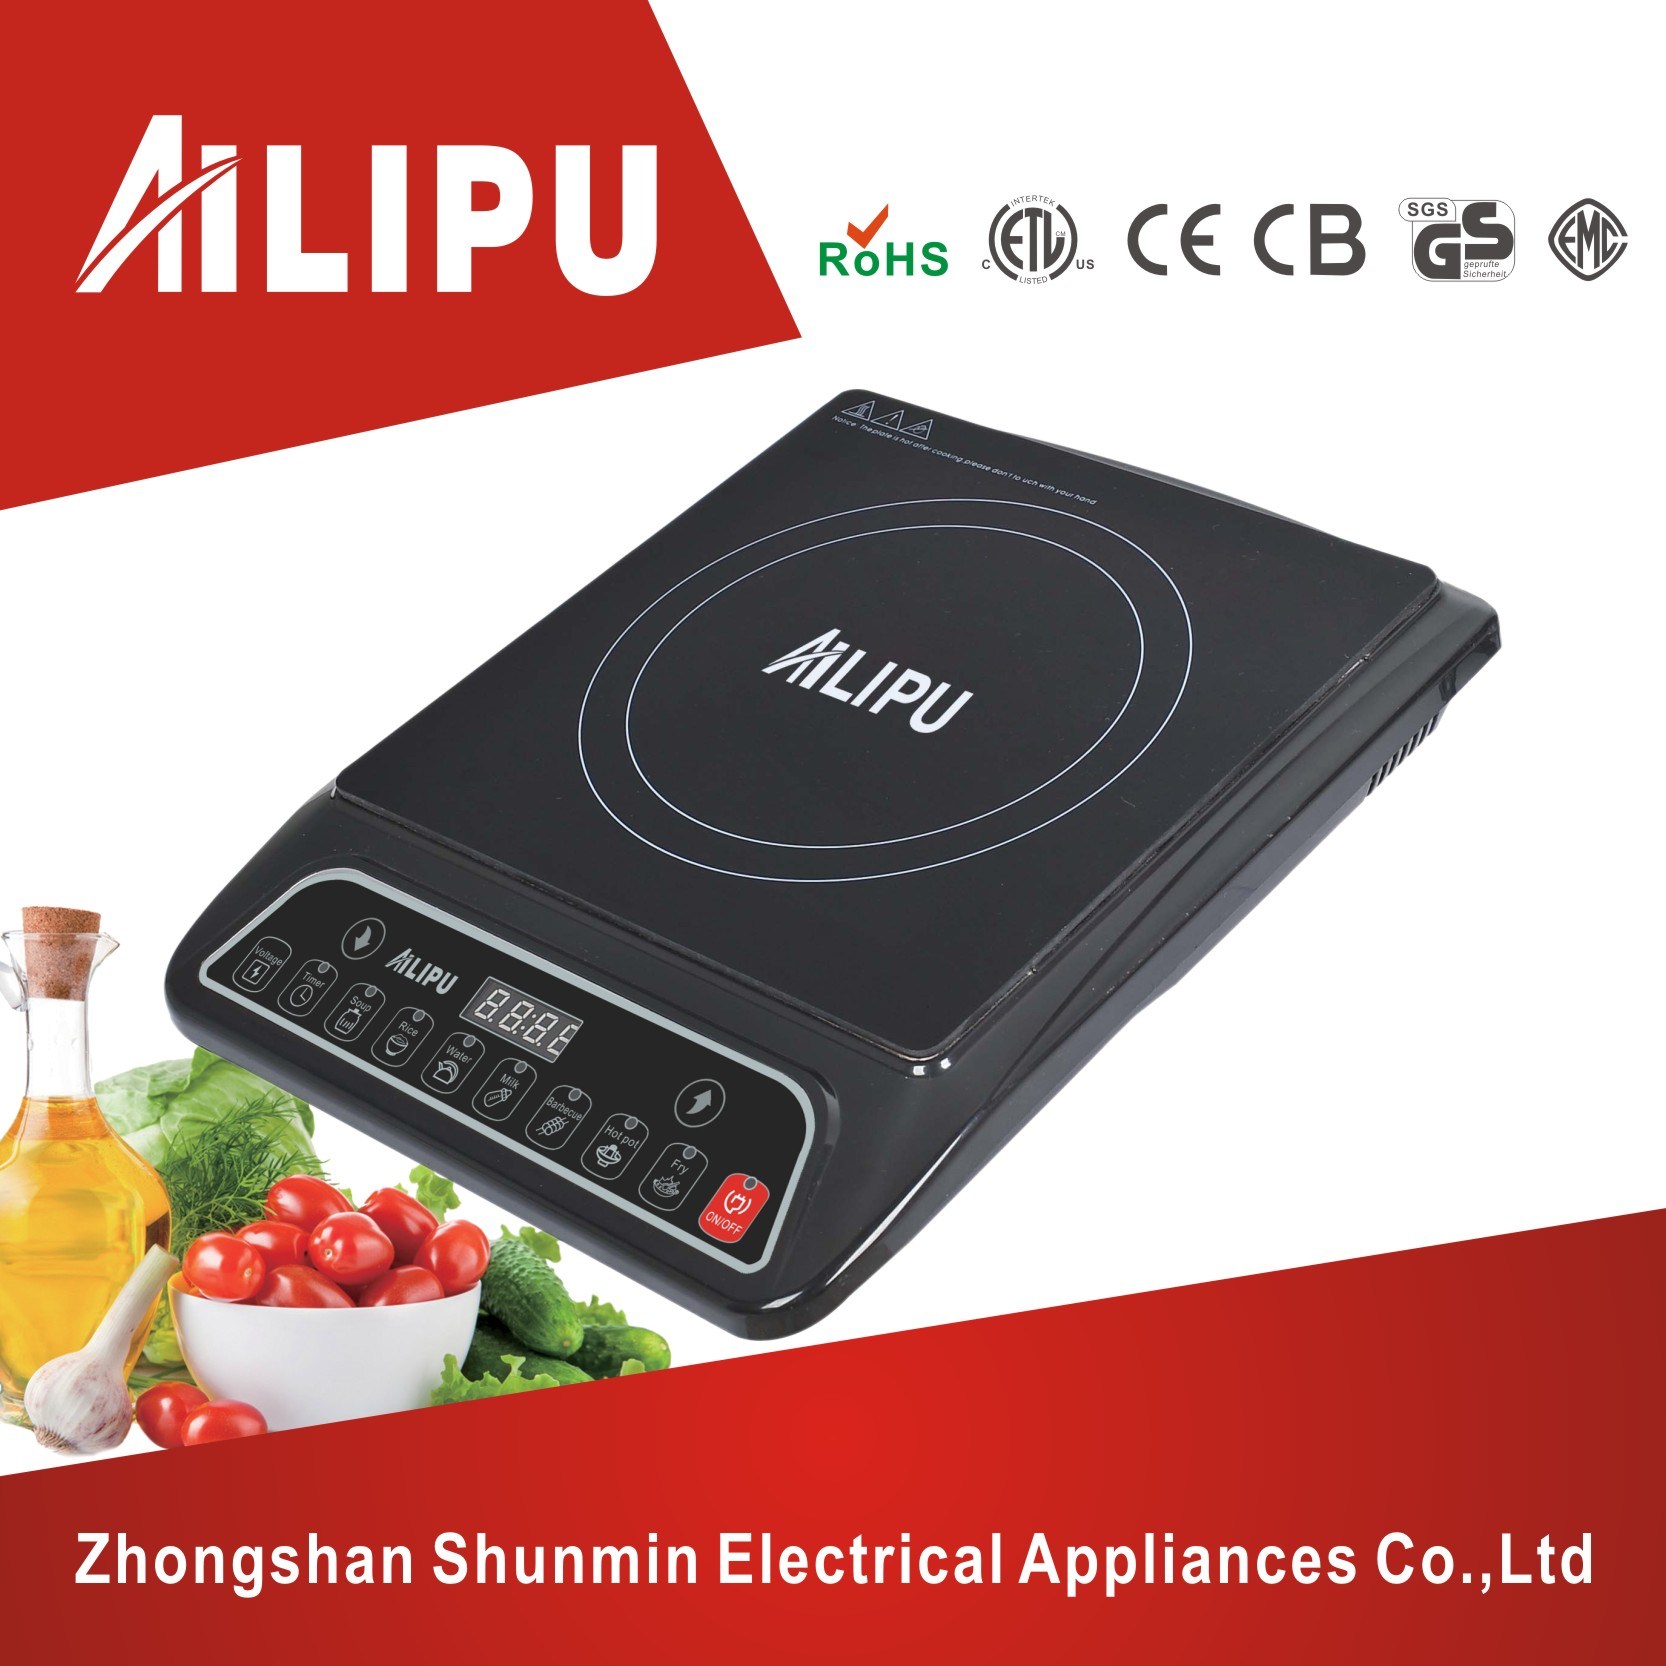 Ailipu Brand First Induction Cooker/Electrical Cooktop/Magnetic Cooker/Kitchen Appliances